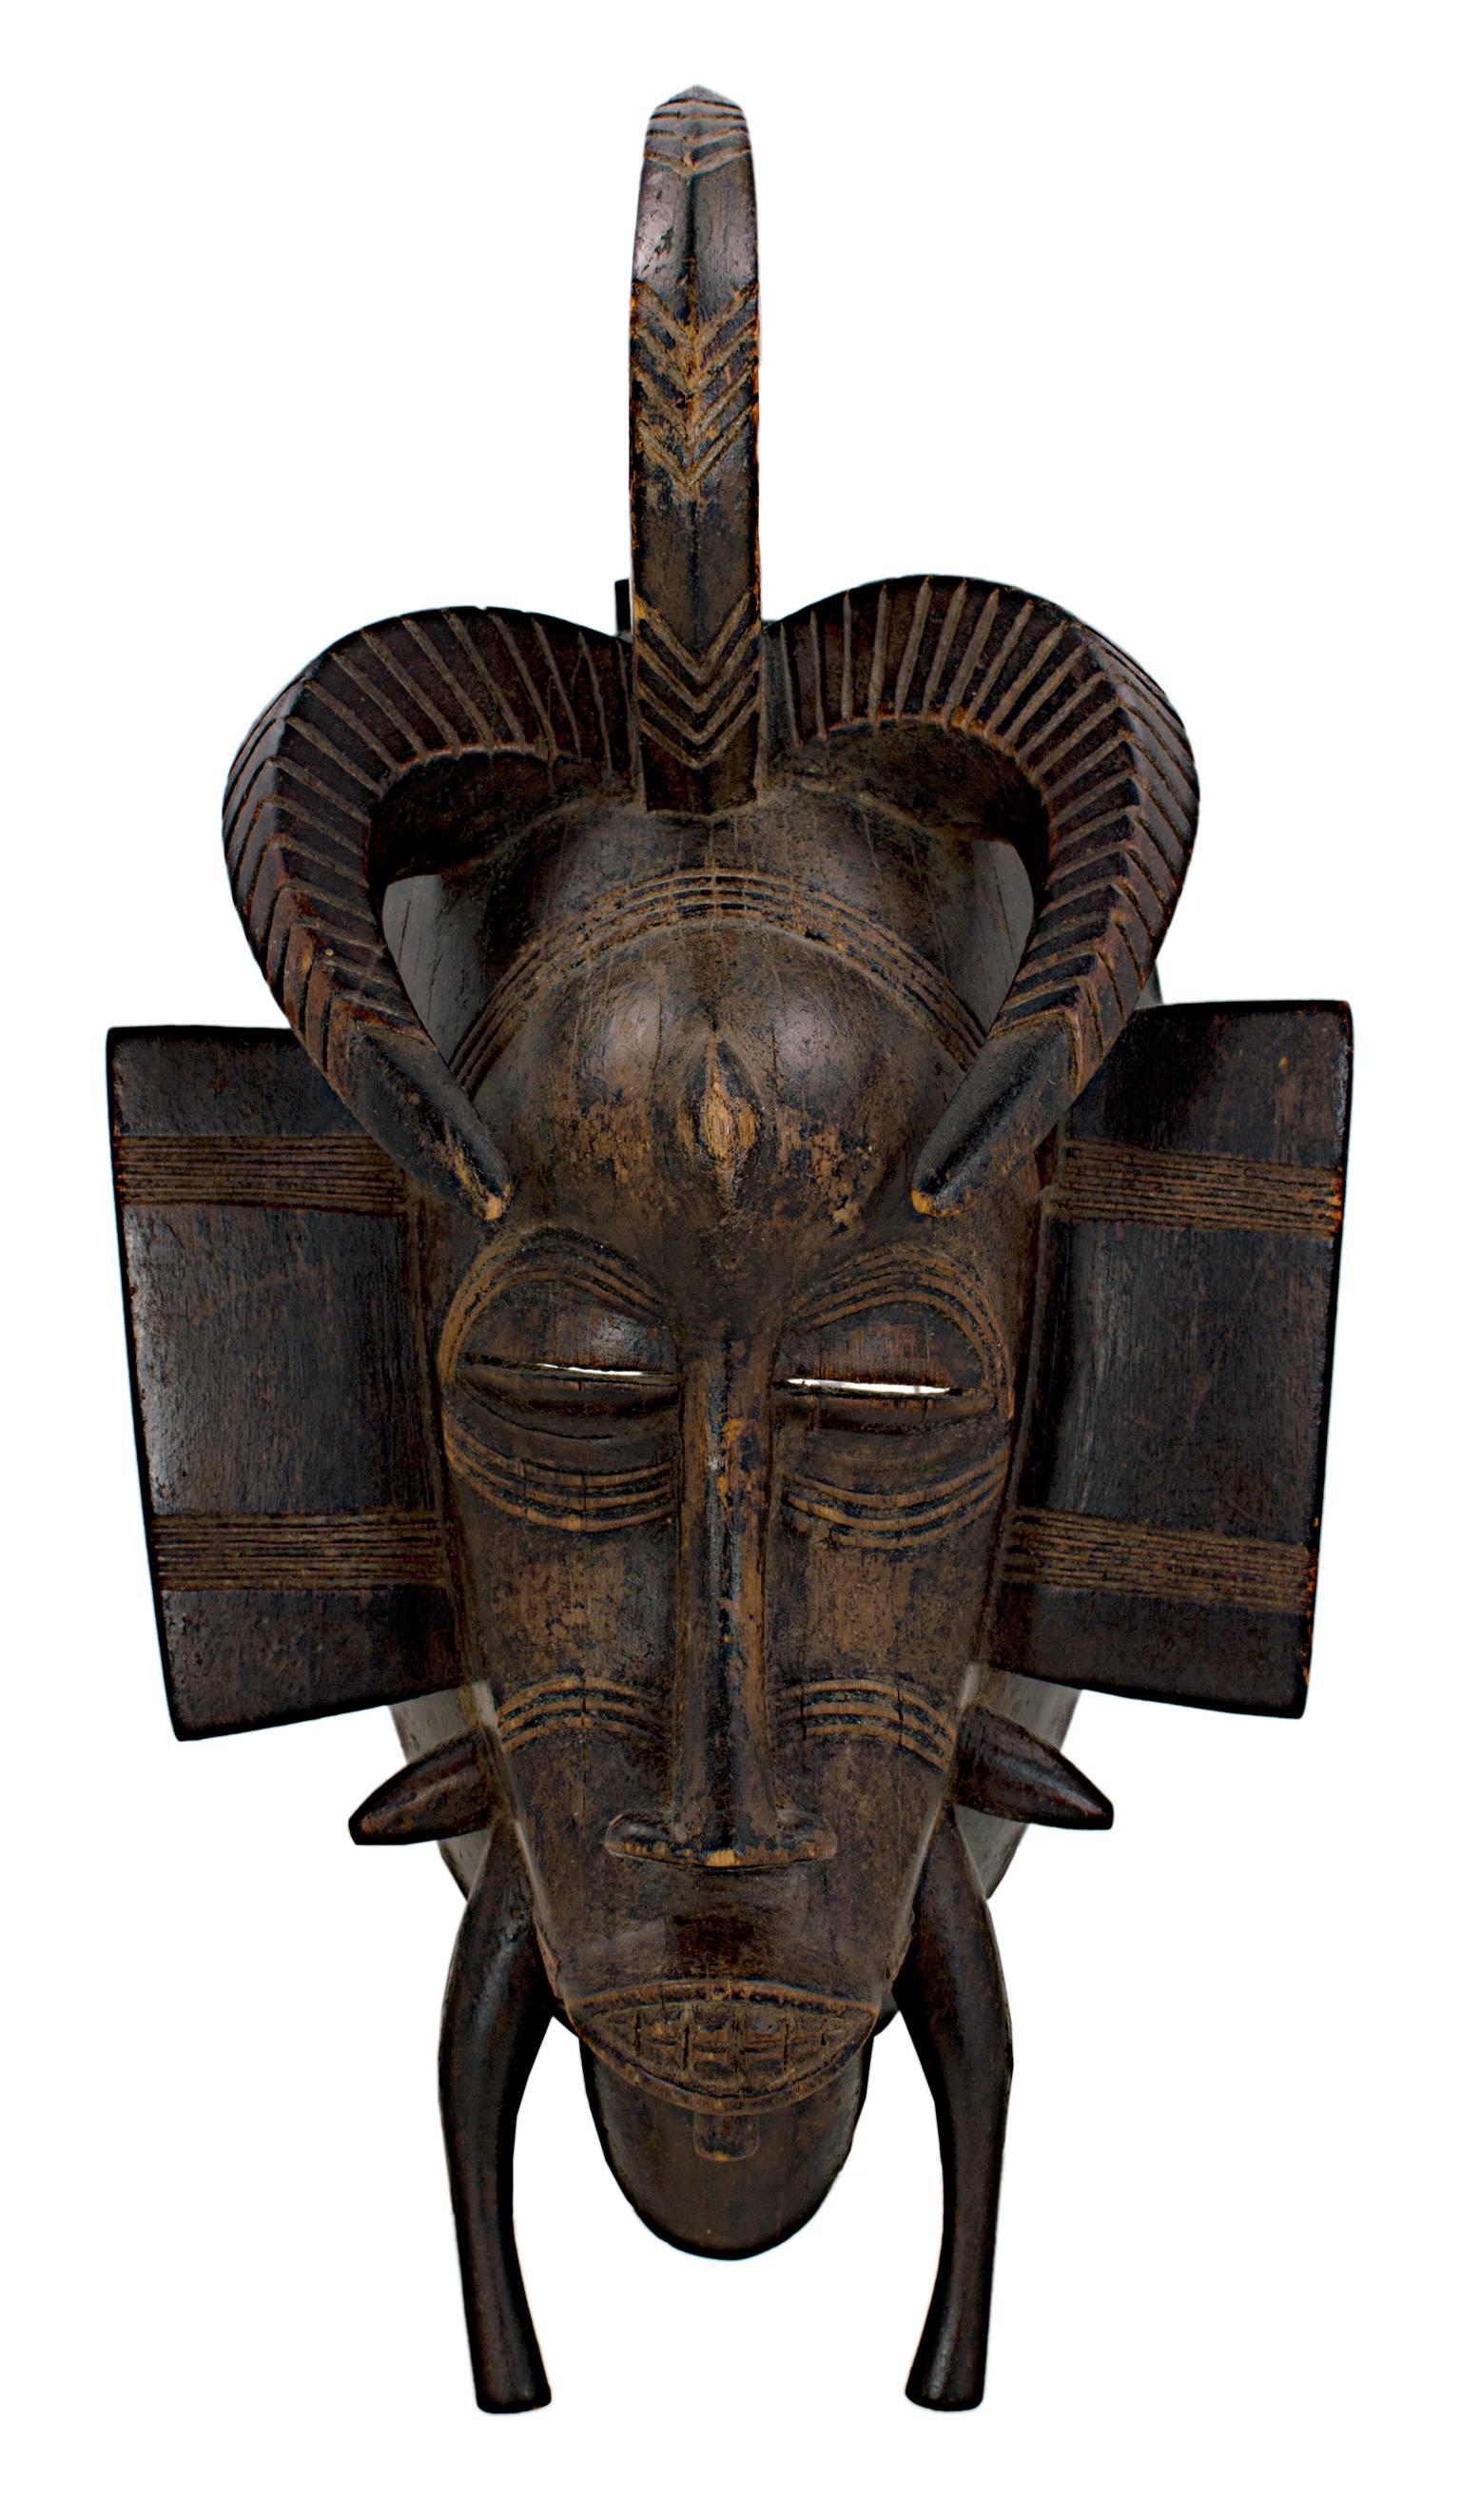 When was the Senufo mask made?